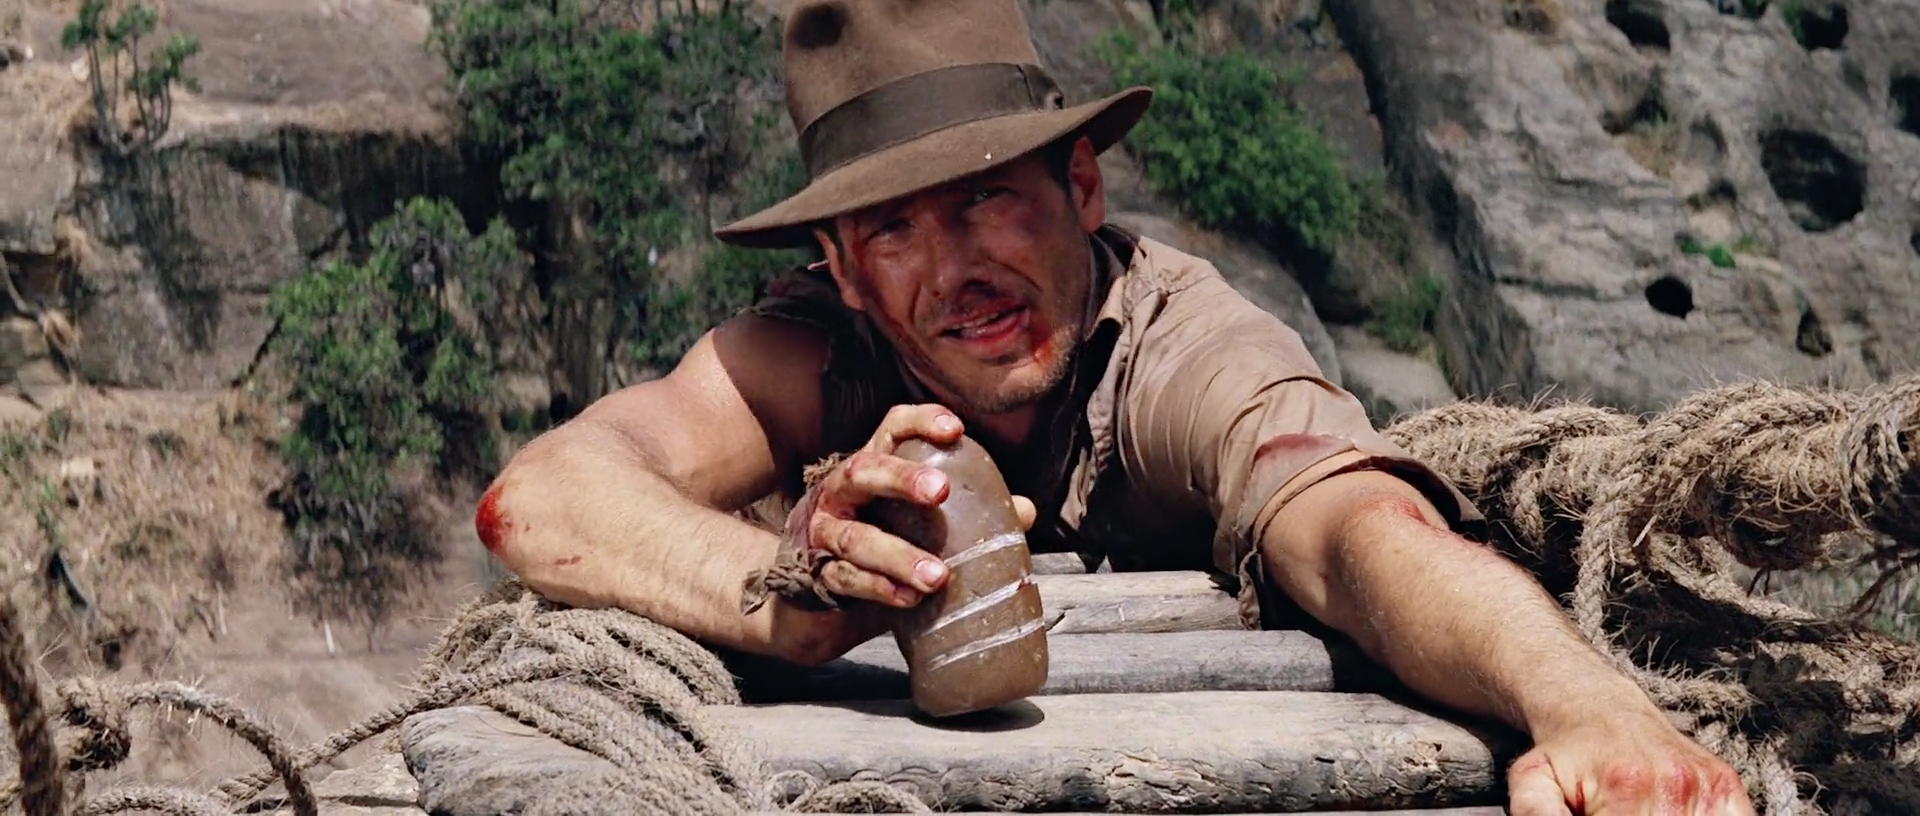 The true story of the 'lost city' made famous by Indiana Jones